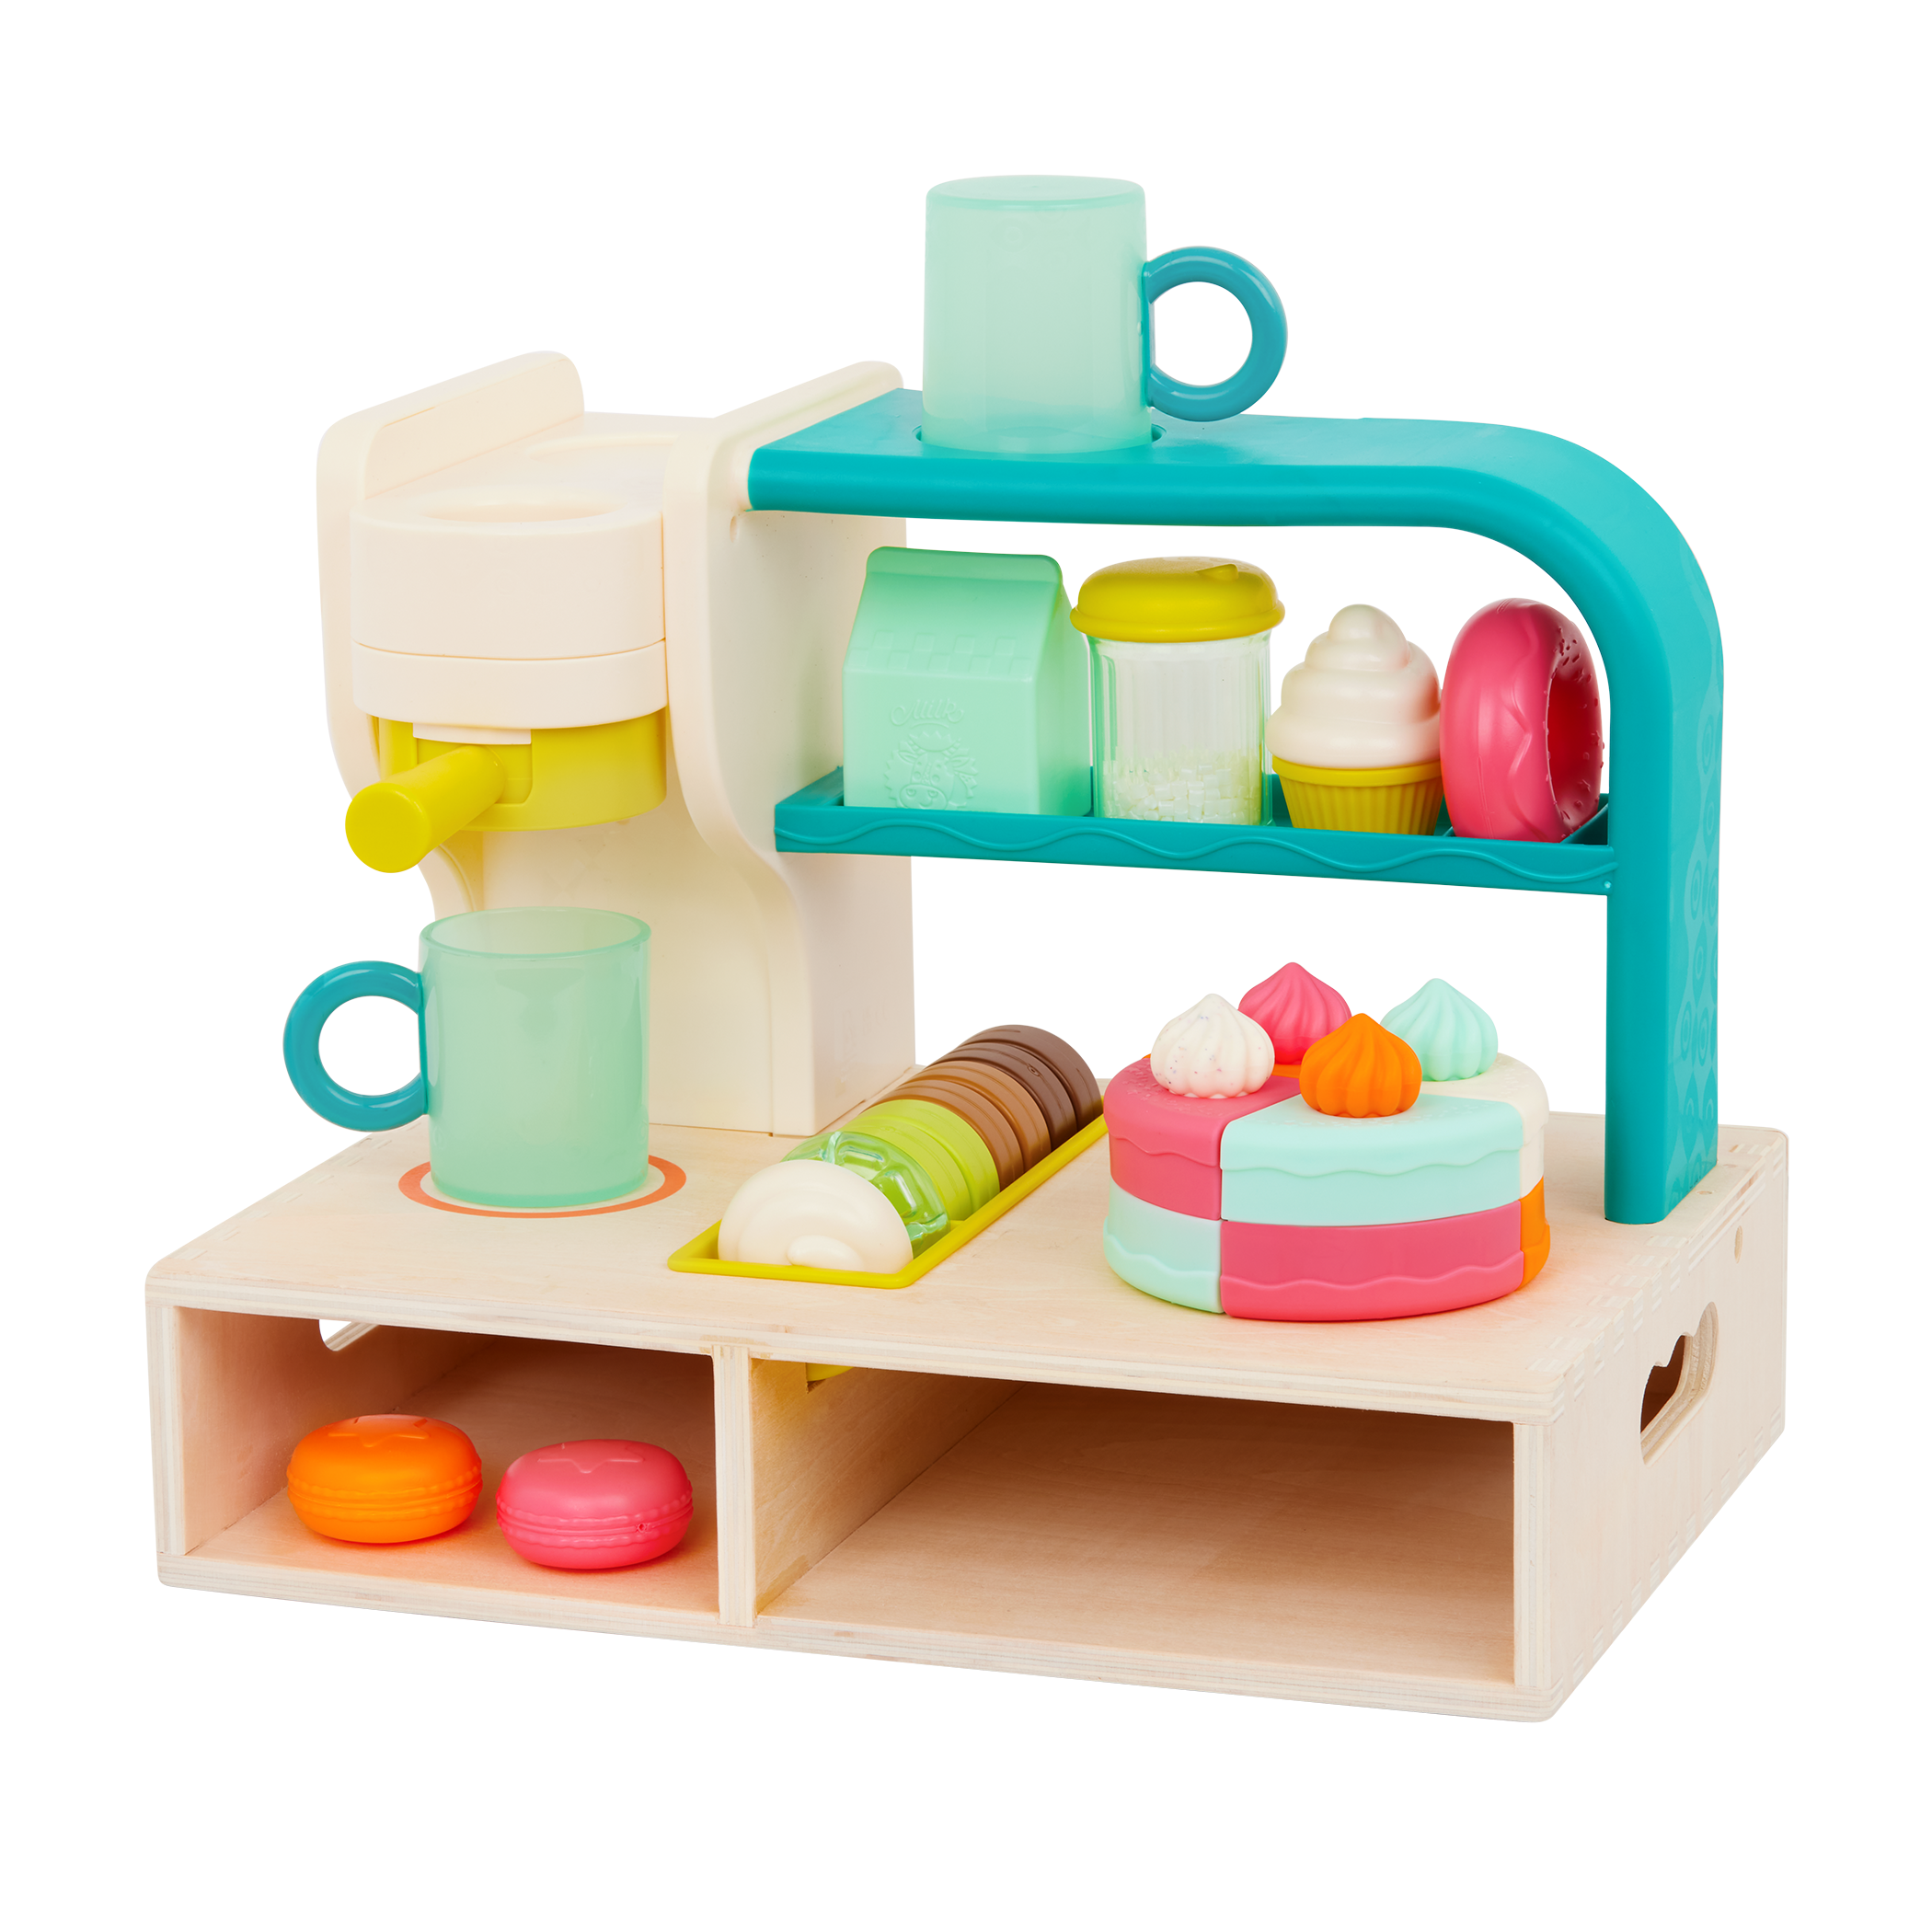 B. toys-Mini Chef - Fruity Smoothie Playset- Pretend Play Smoothie Play Set  – Toy Blender & Play Kitchen Accessories – Play Food, Cup, Cutting Board